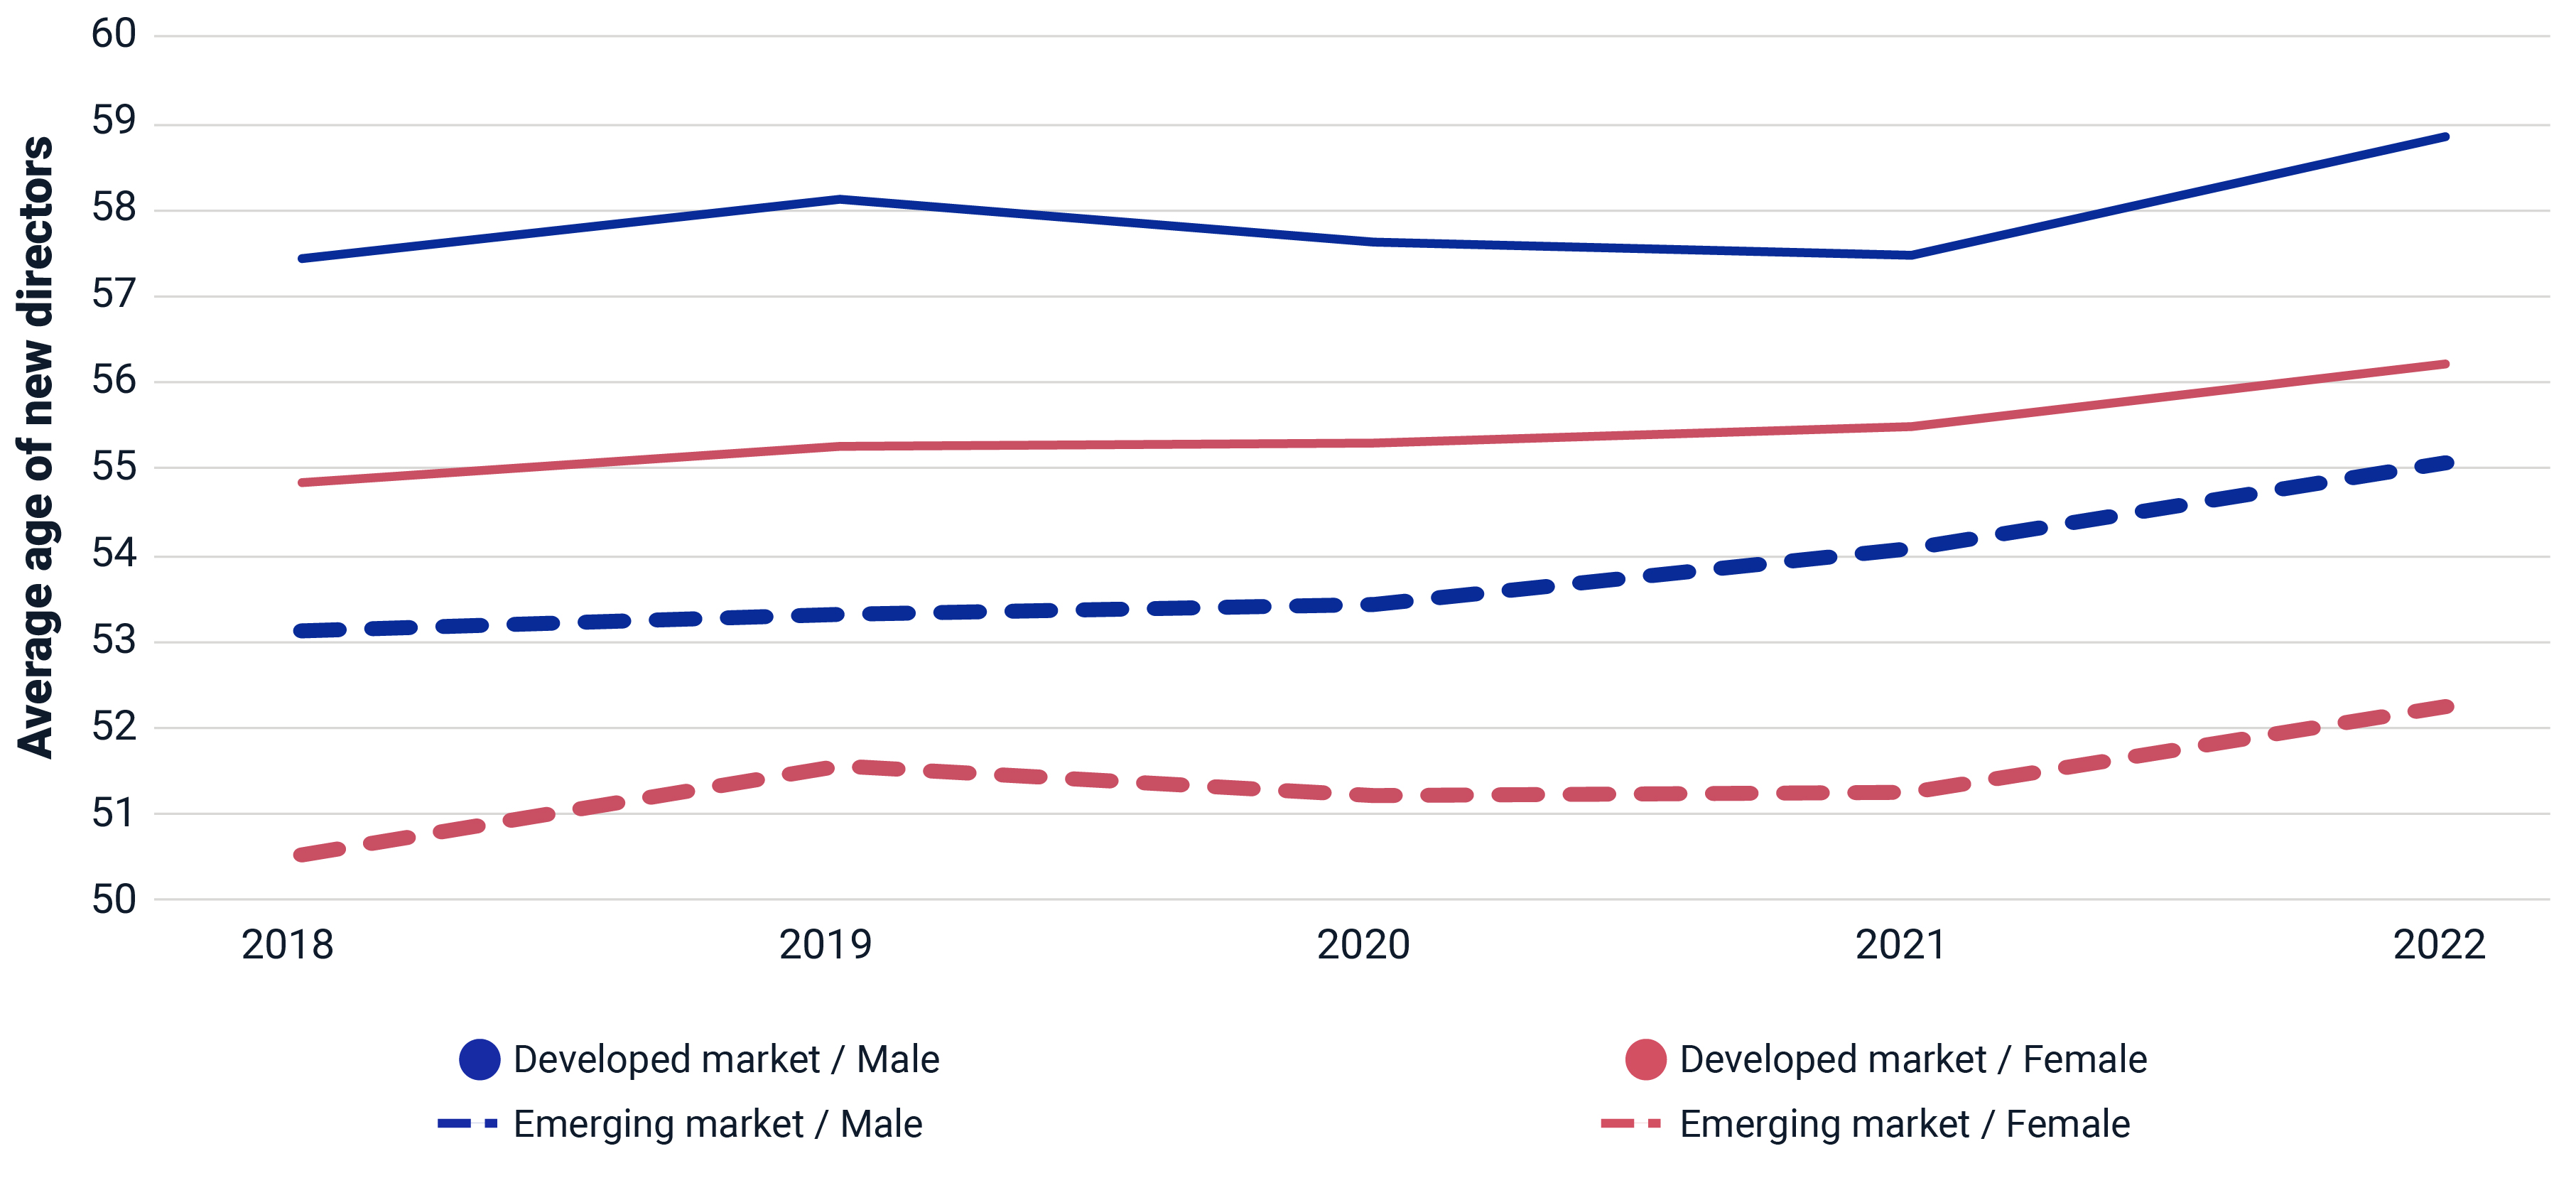 This chart shows the average age of new directors by market and gender